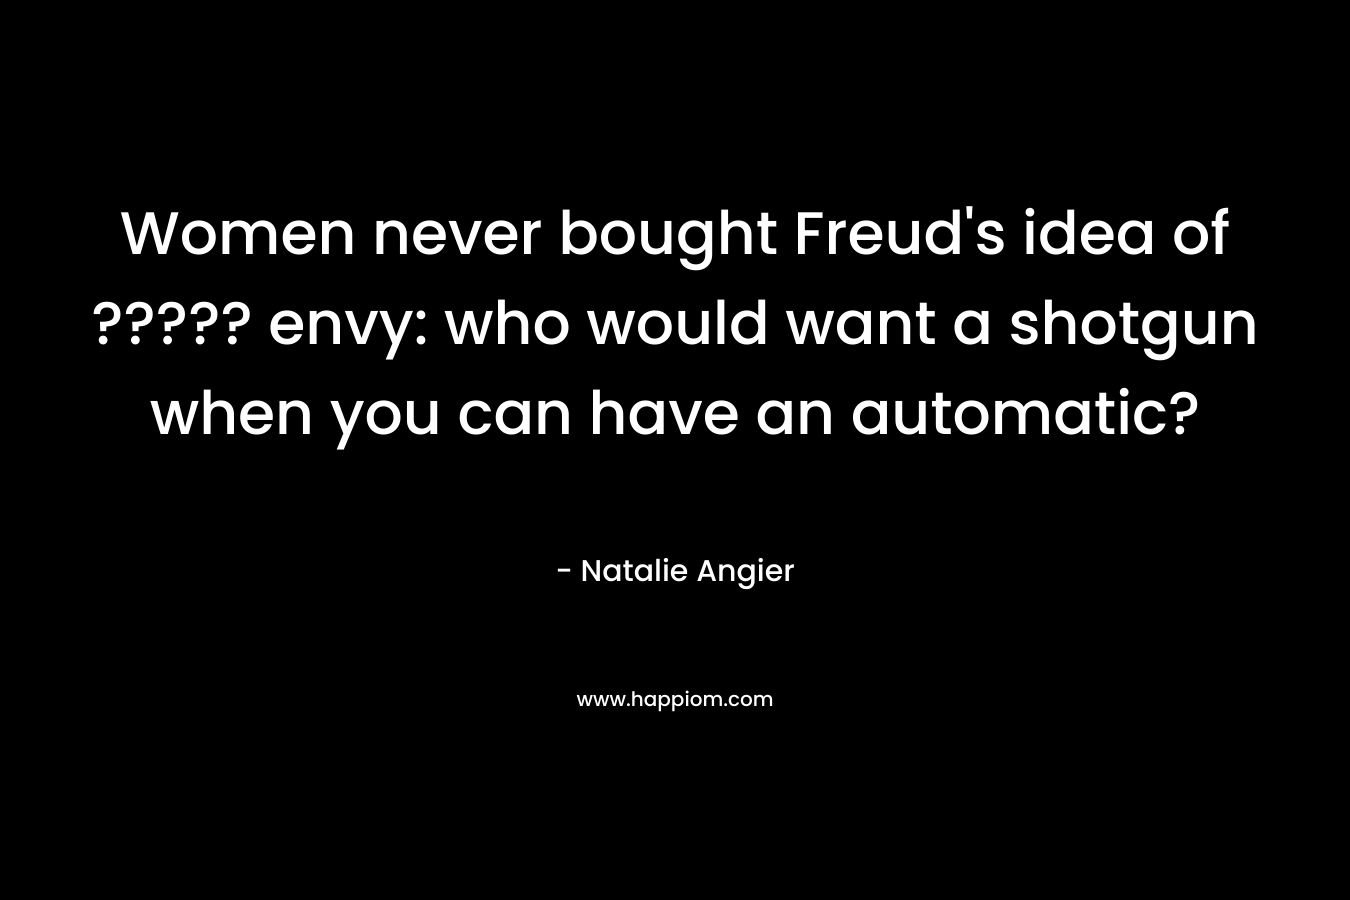 Women never bought Freud's idea of ????? envy: who would want a shotgun when you can have an automatic?